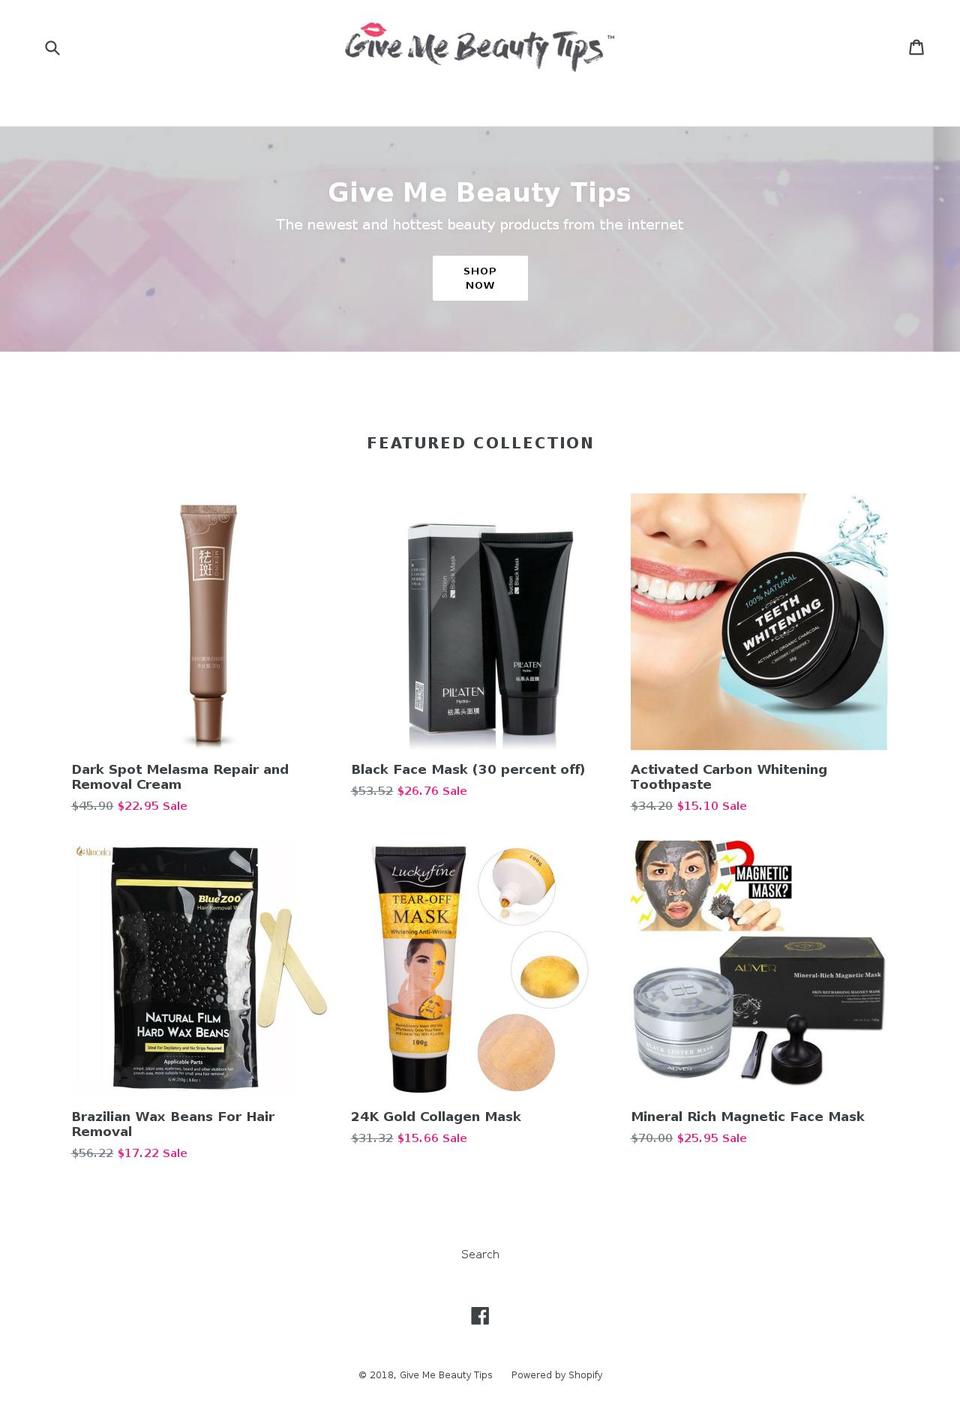 Snow Shopify theme site example givemebeautytips.com